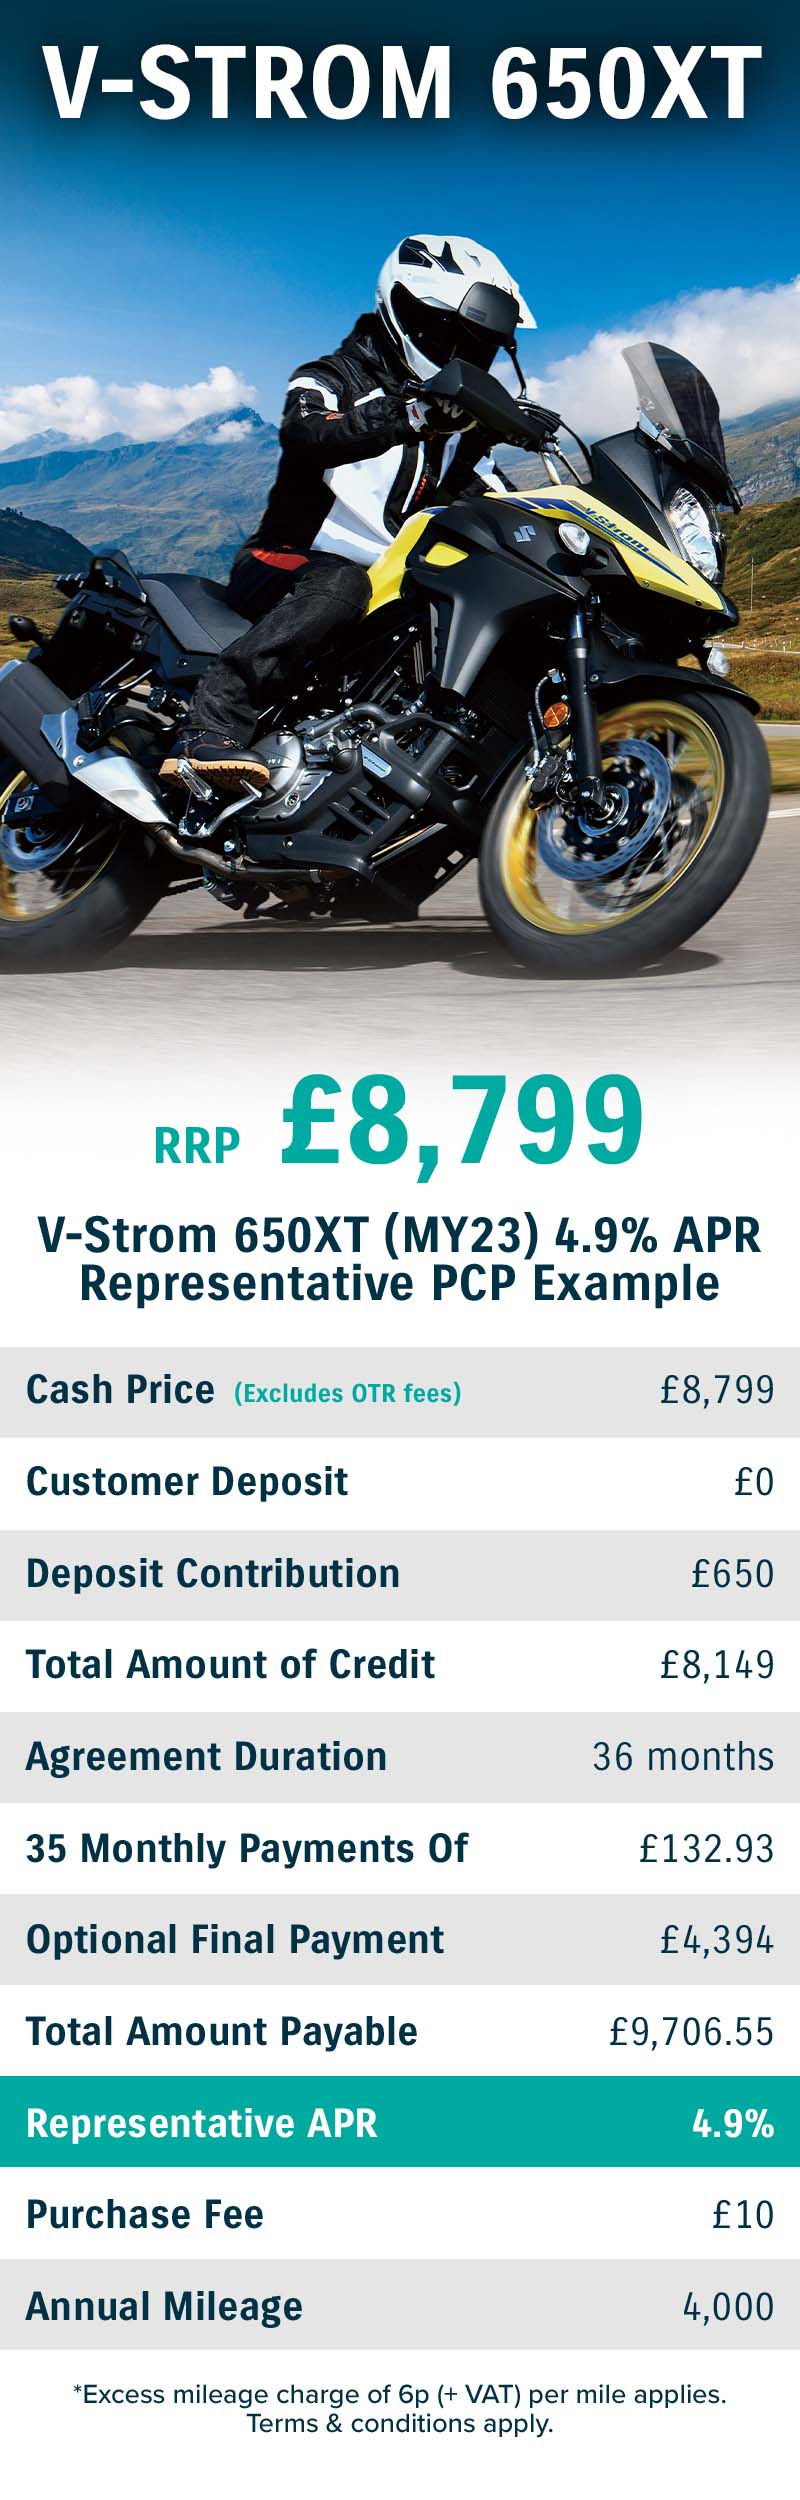 Enjoy a £650 test ride contribution with the Suzuki V-Strom 650XT at Laguna Motorcycles in Maidstone